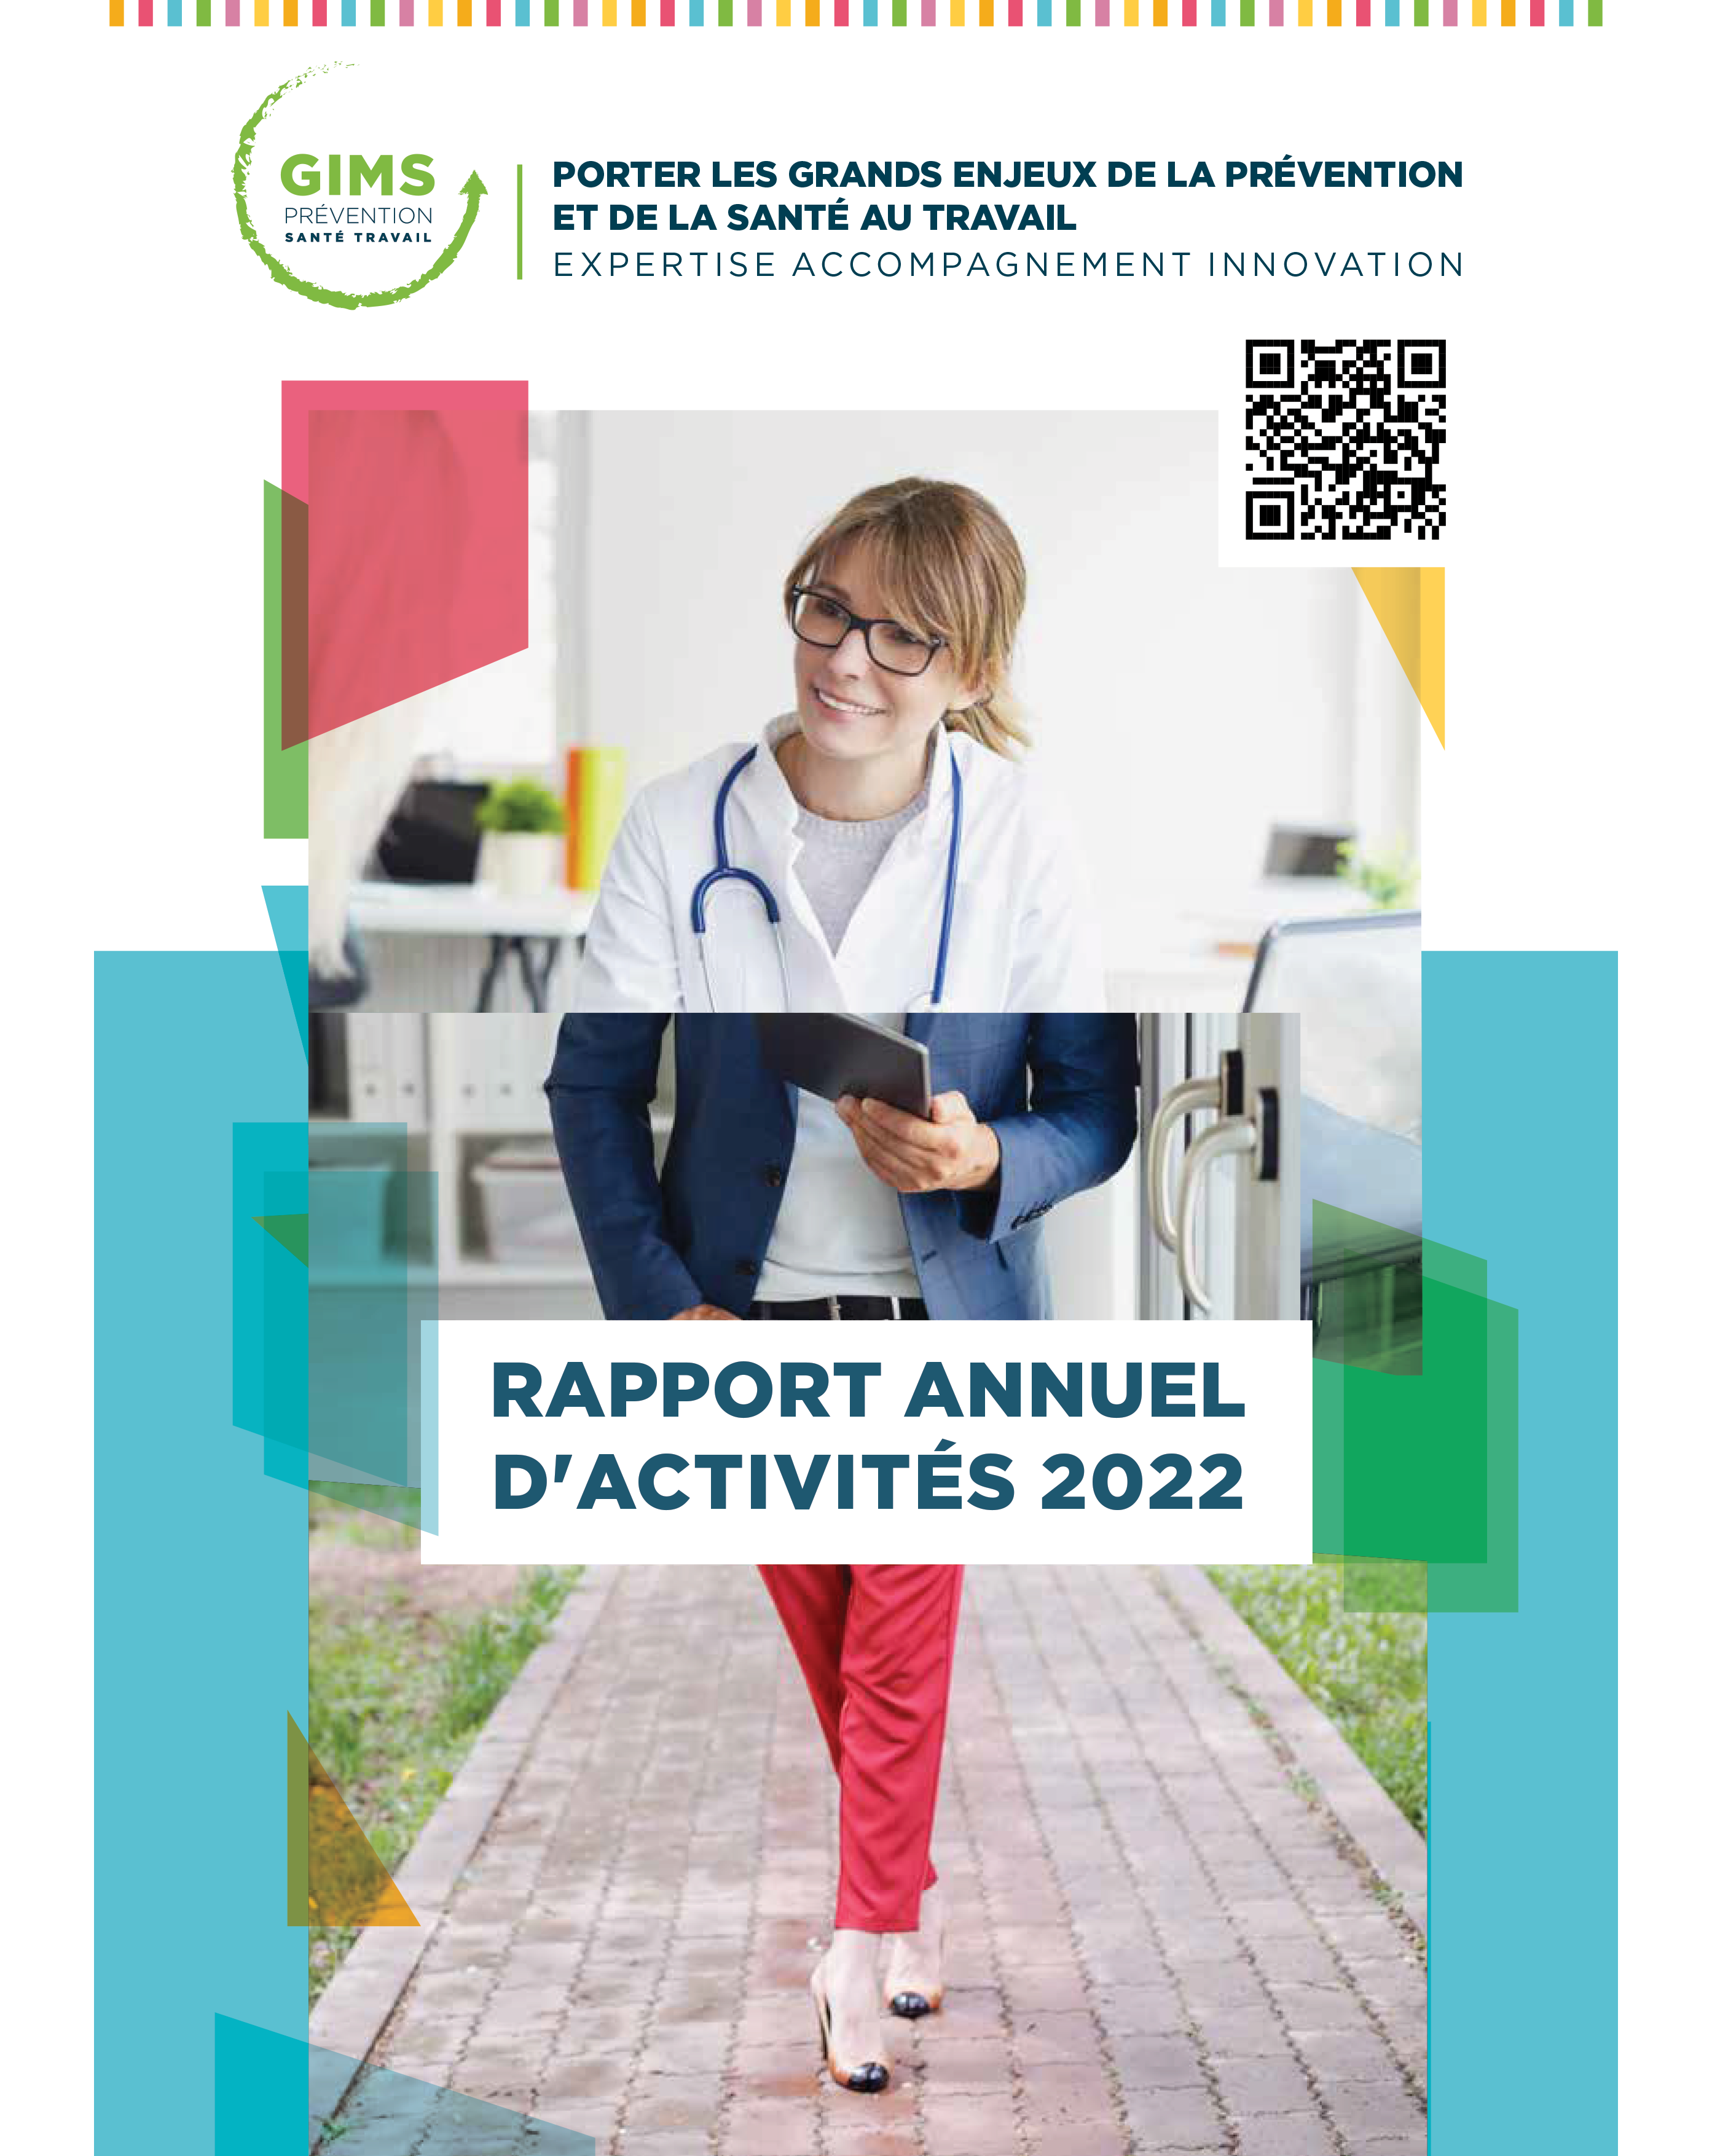 GIMS_Img-Rapport-Activites-2022